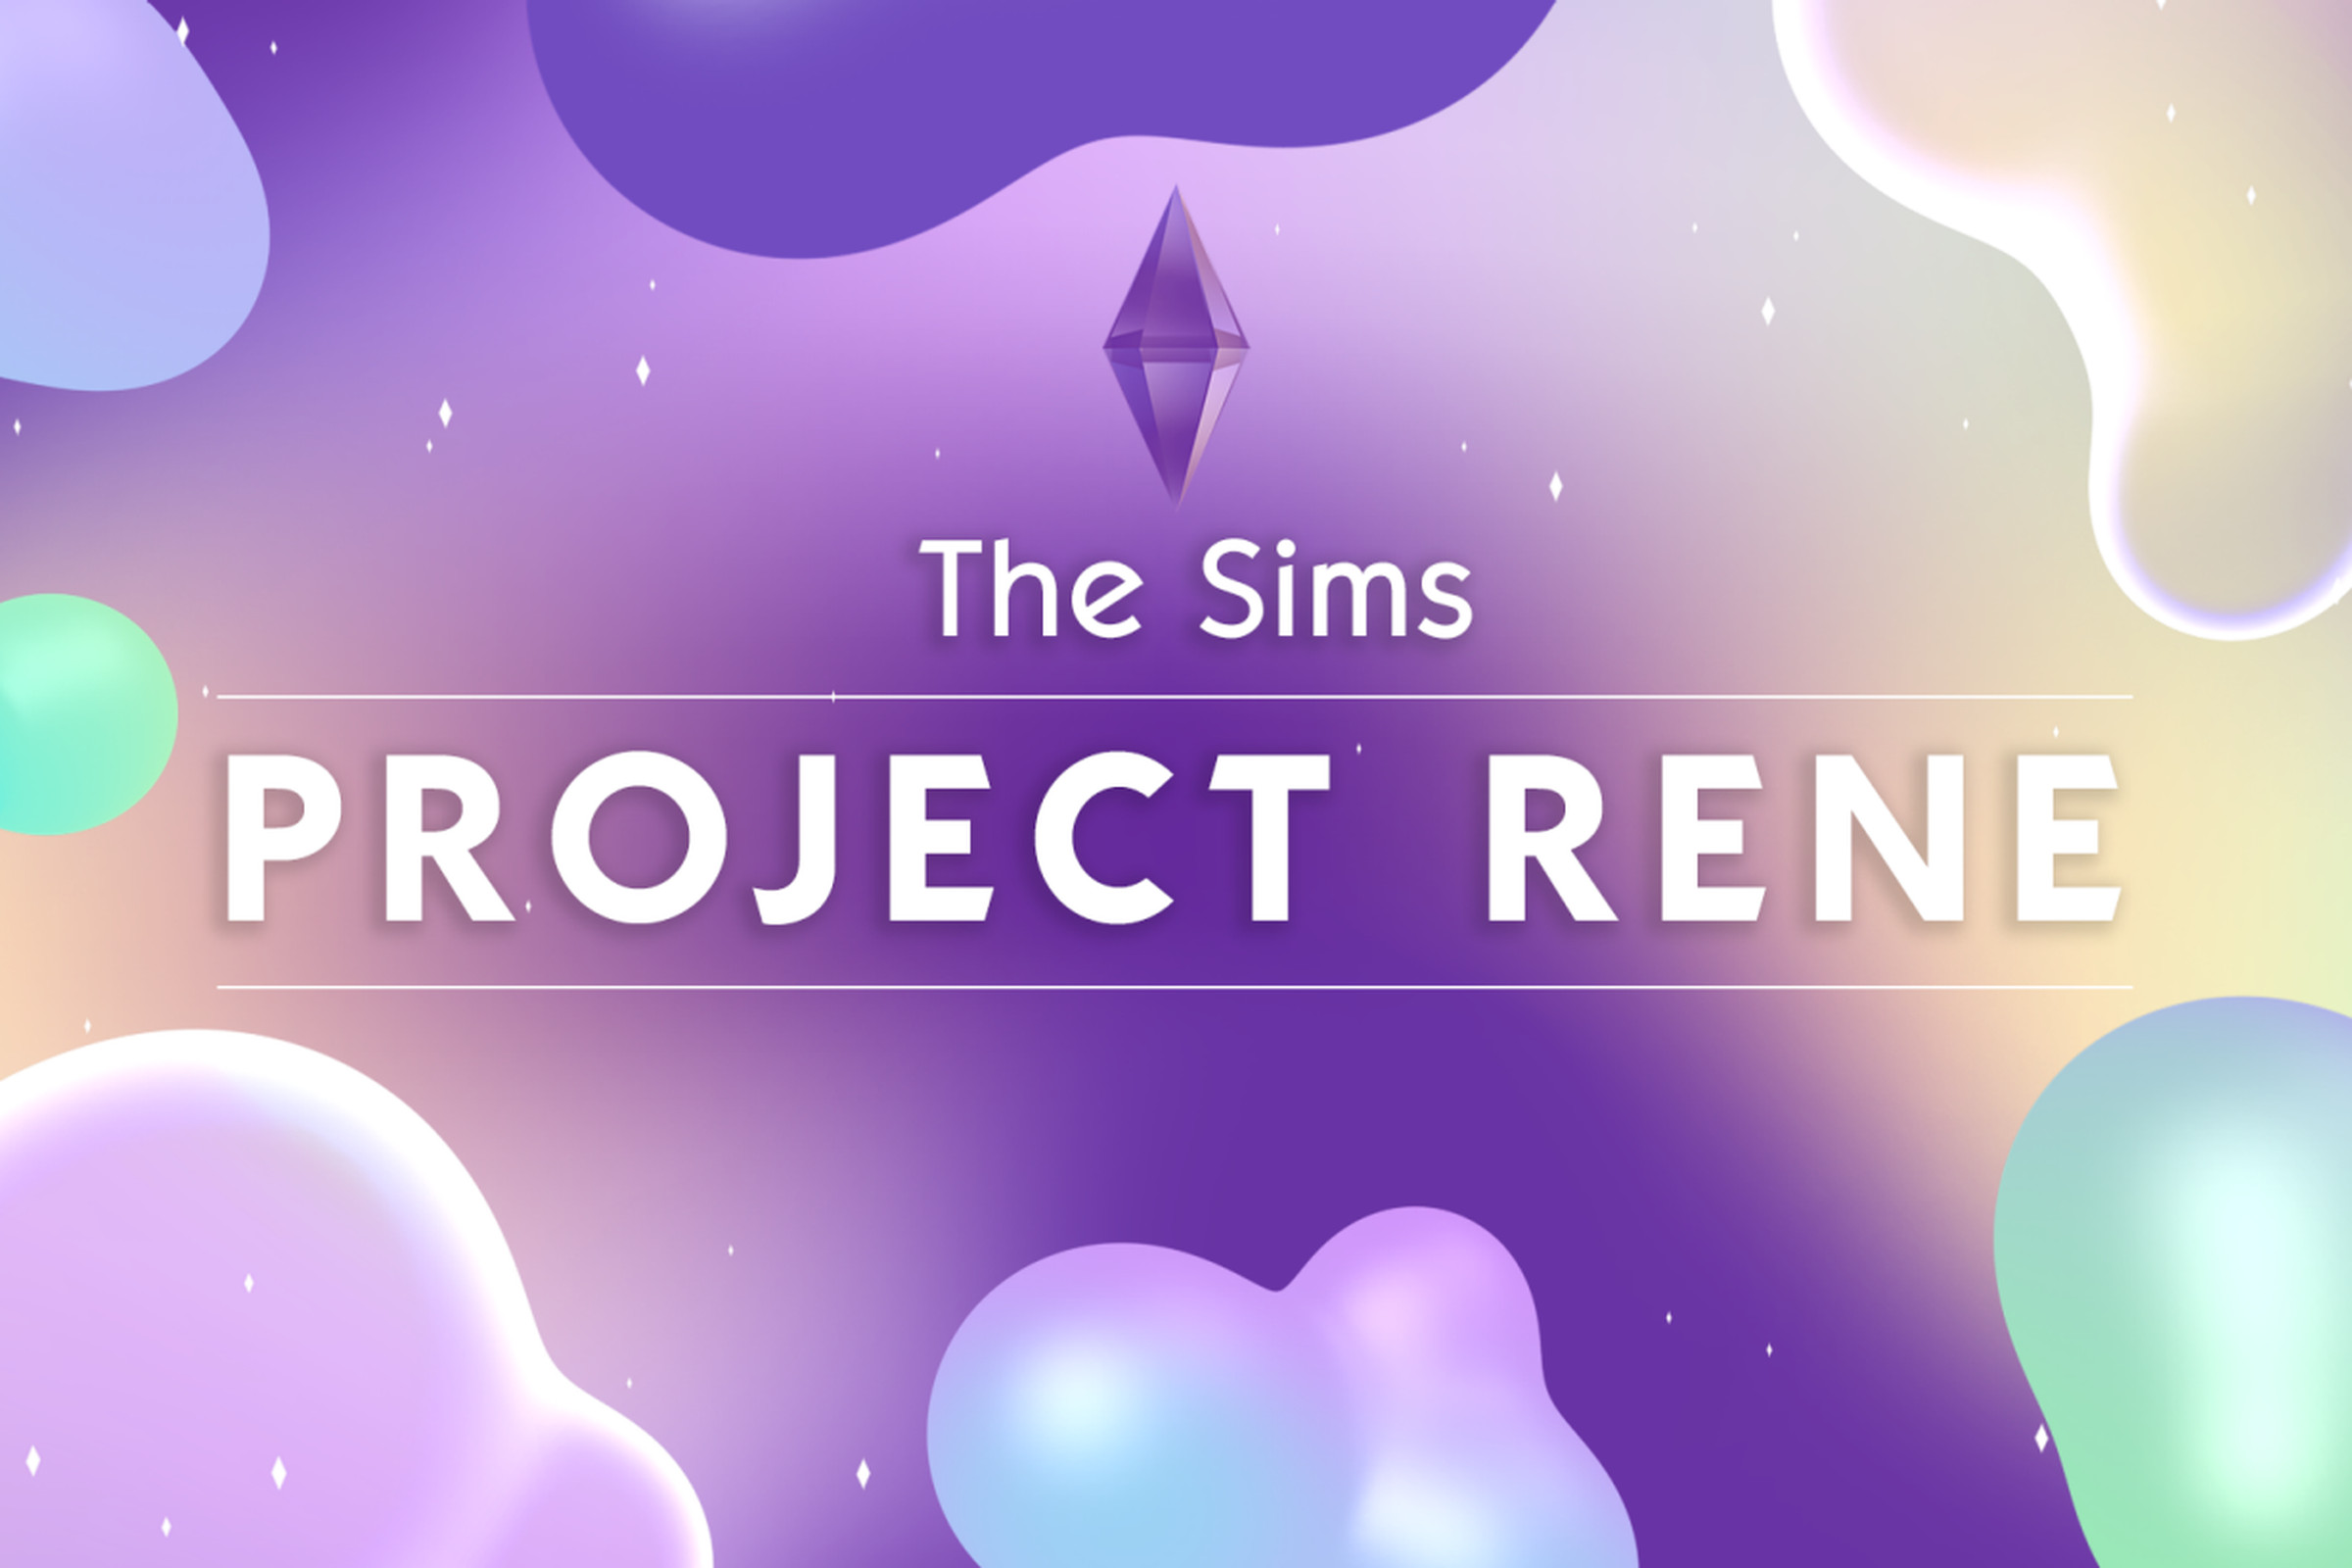 Promotional art for The Sims ‘Project Rene.’